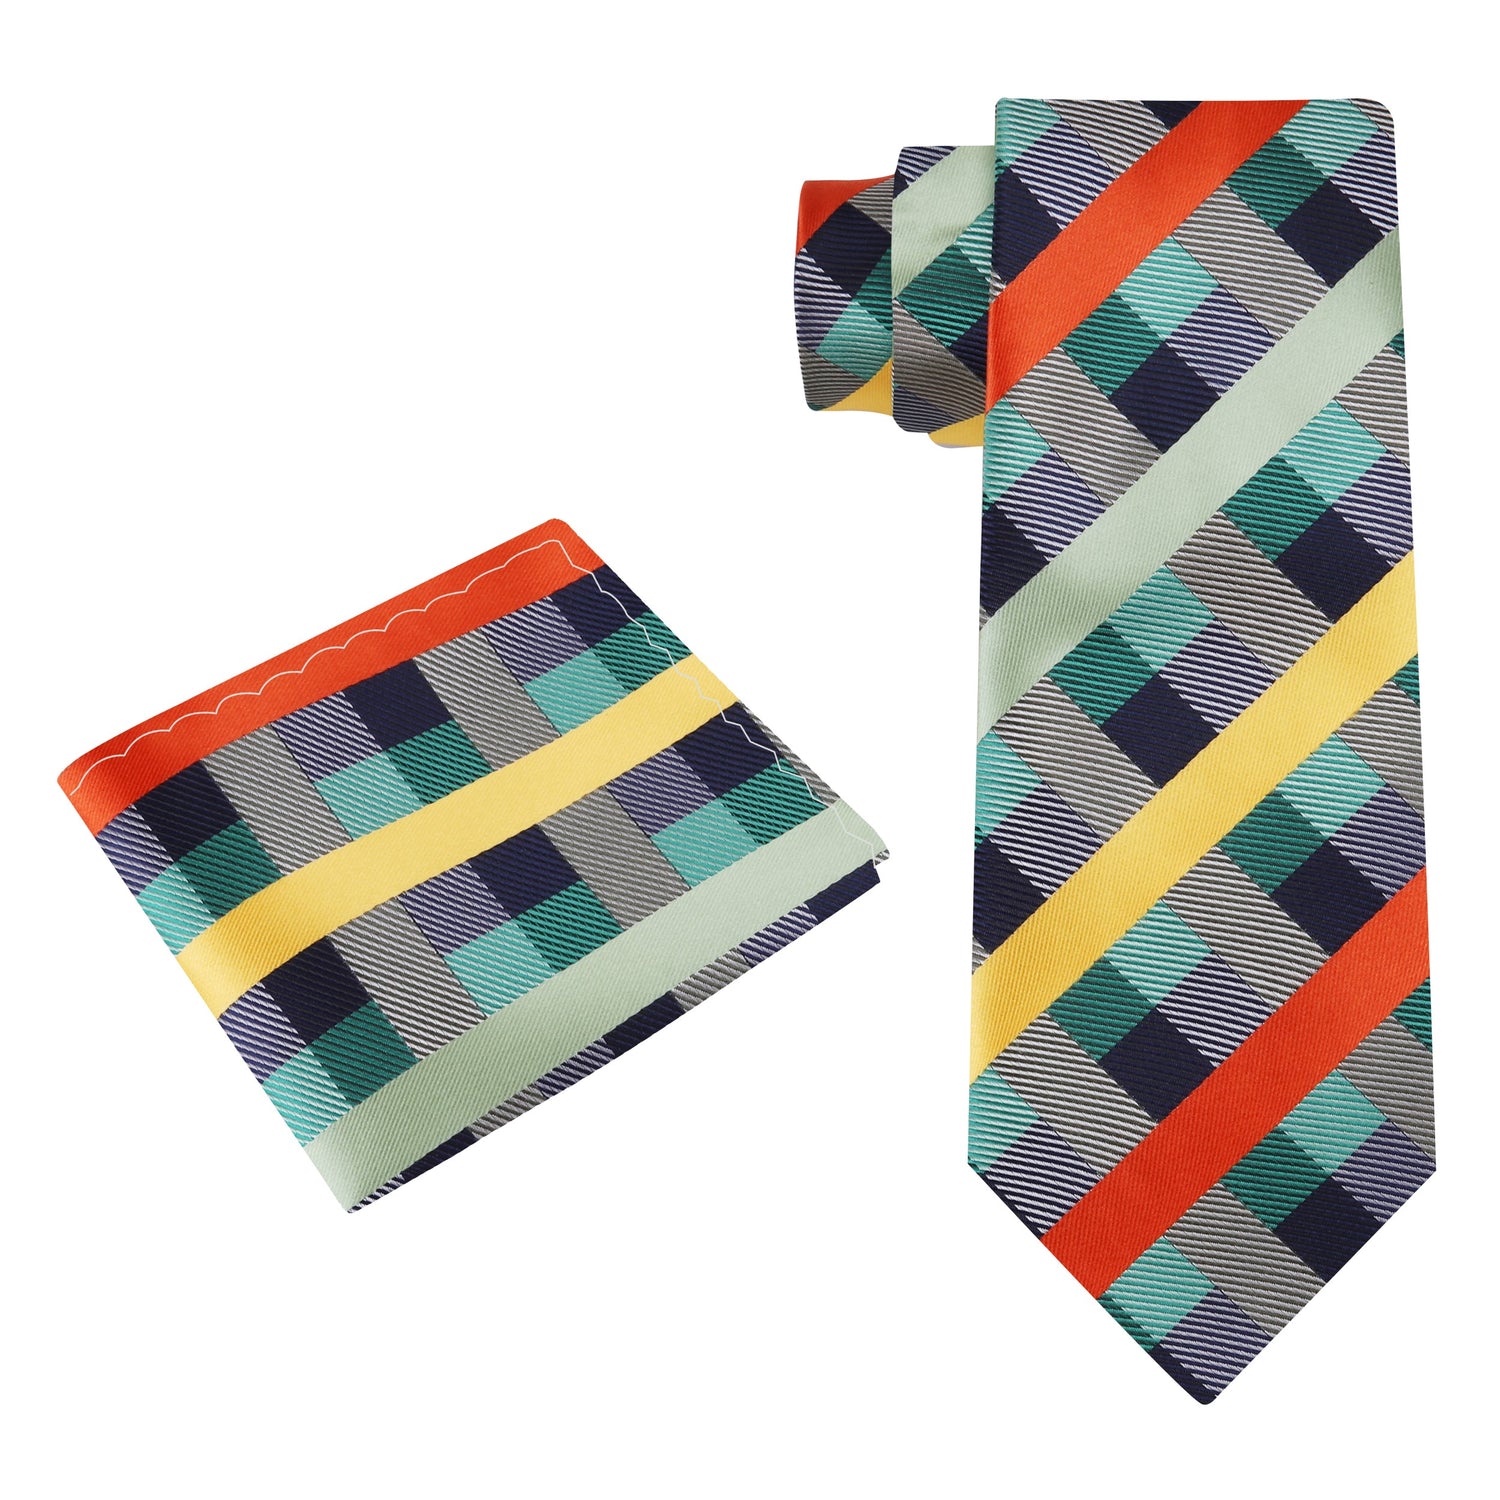 Alt View: Green, Yellow, Orange Check Tie and Pocket Square